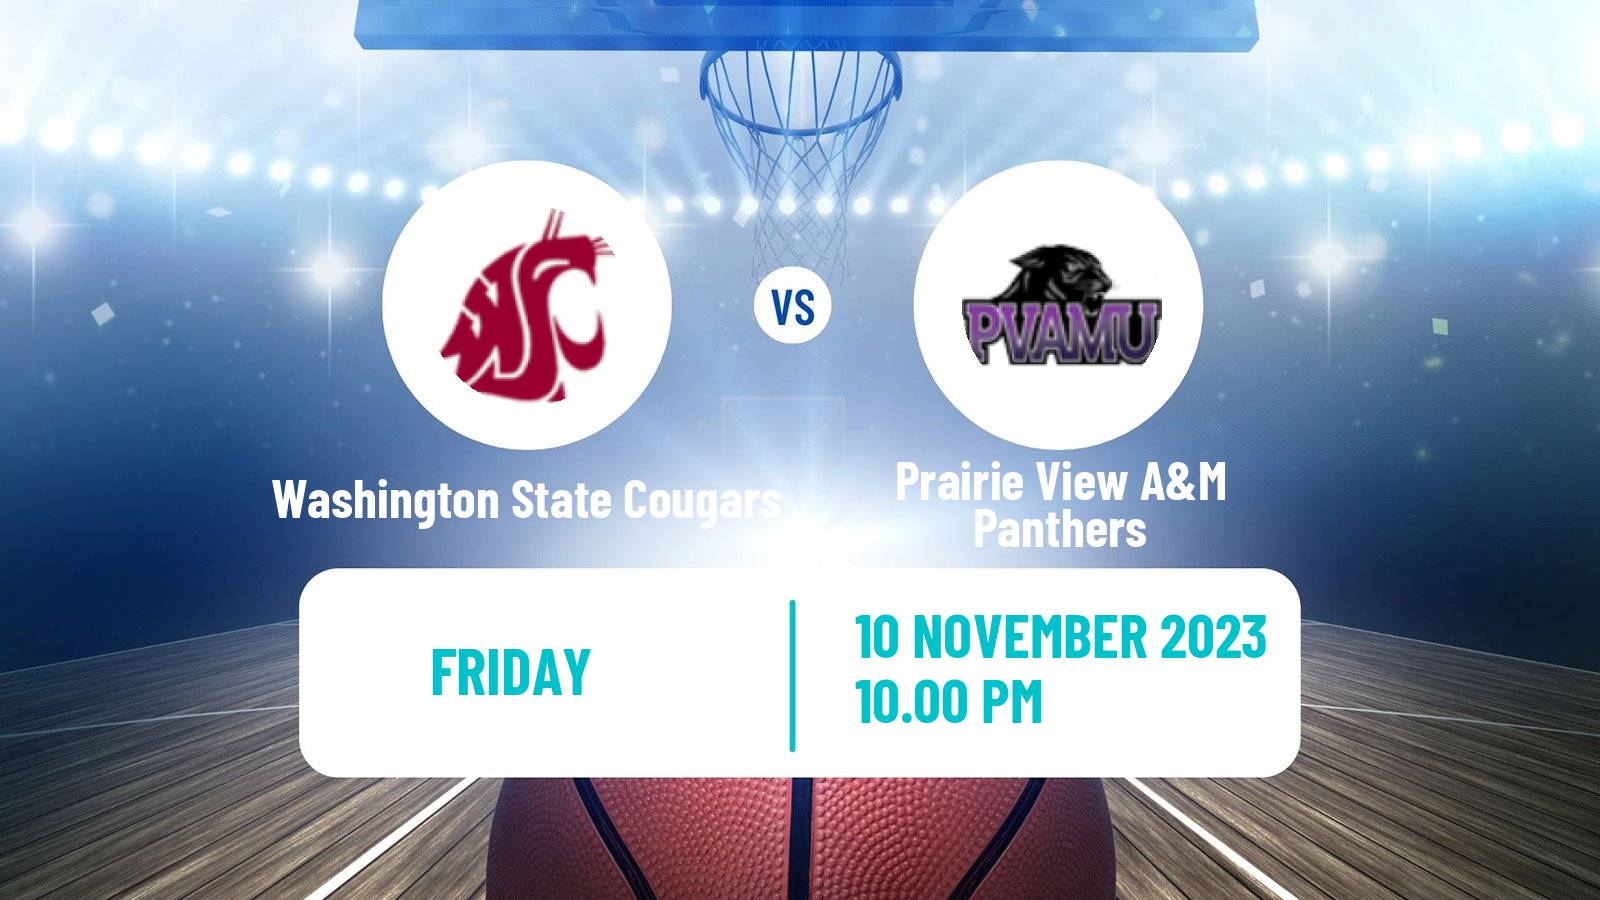 Basketball NCAA College Basketball Washington State Cougars - Prairie View A&M Panthers